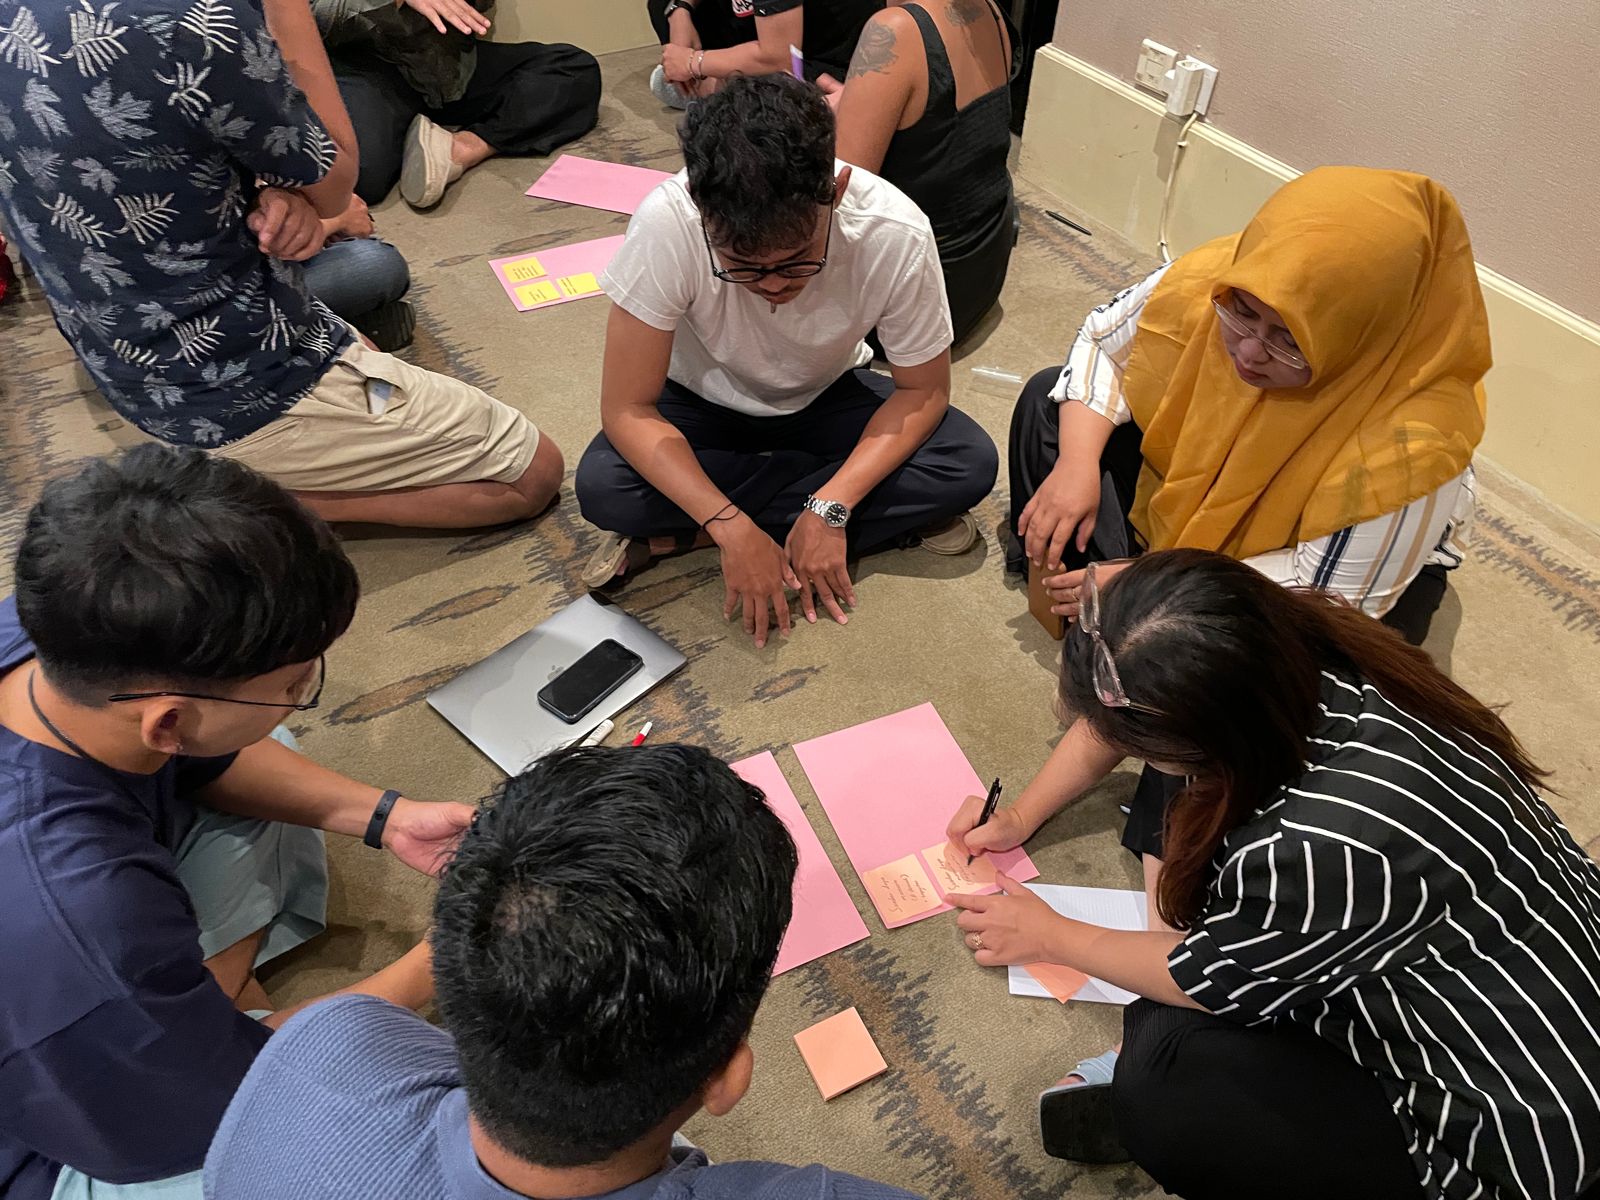 A group of six people is seated on the floor, collaborating on a project with colored paper, markers, and a phone. One person is writing notes while others contribute ideas.